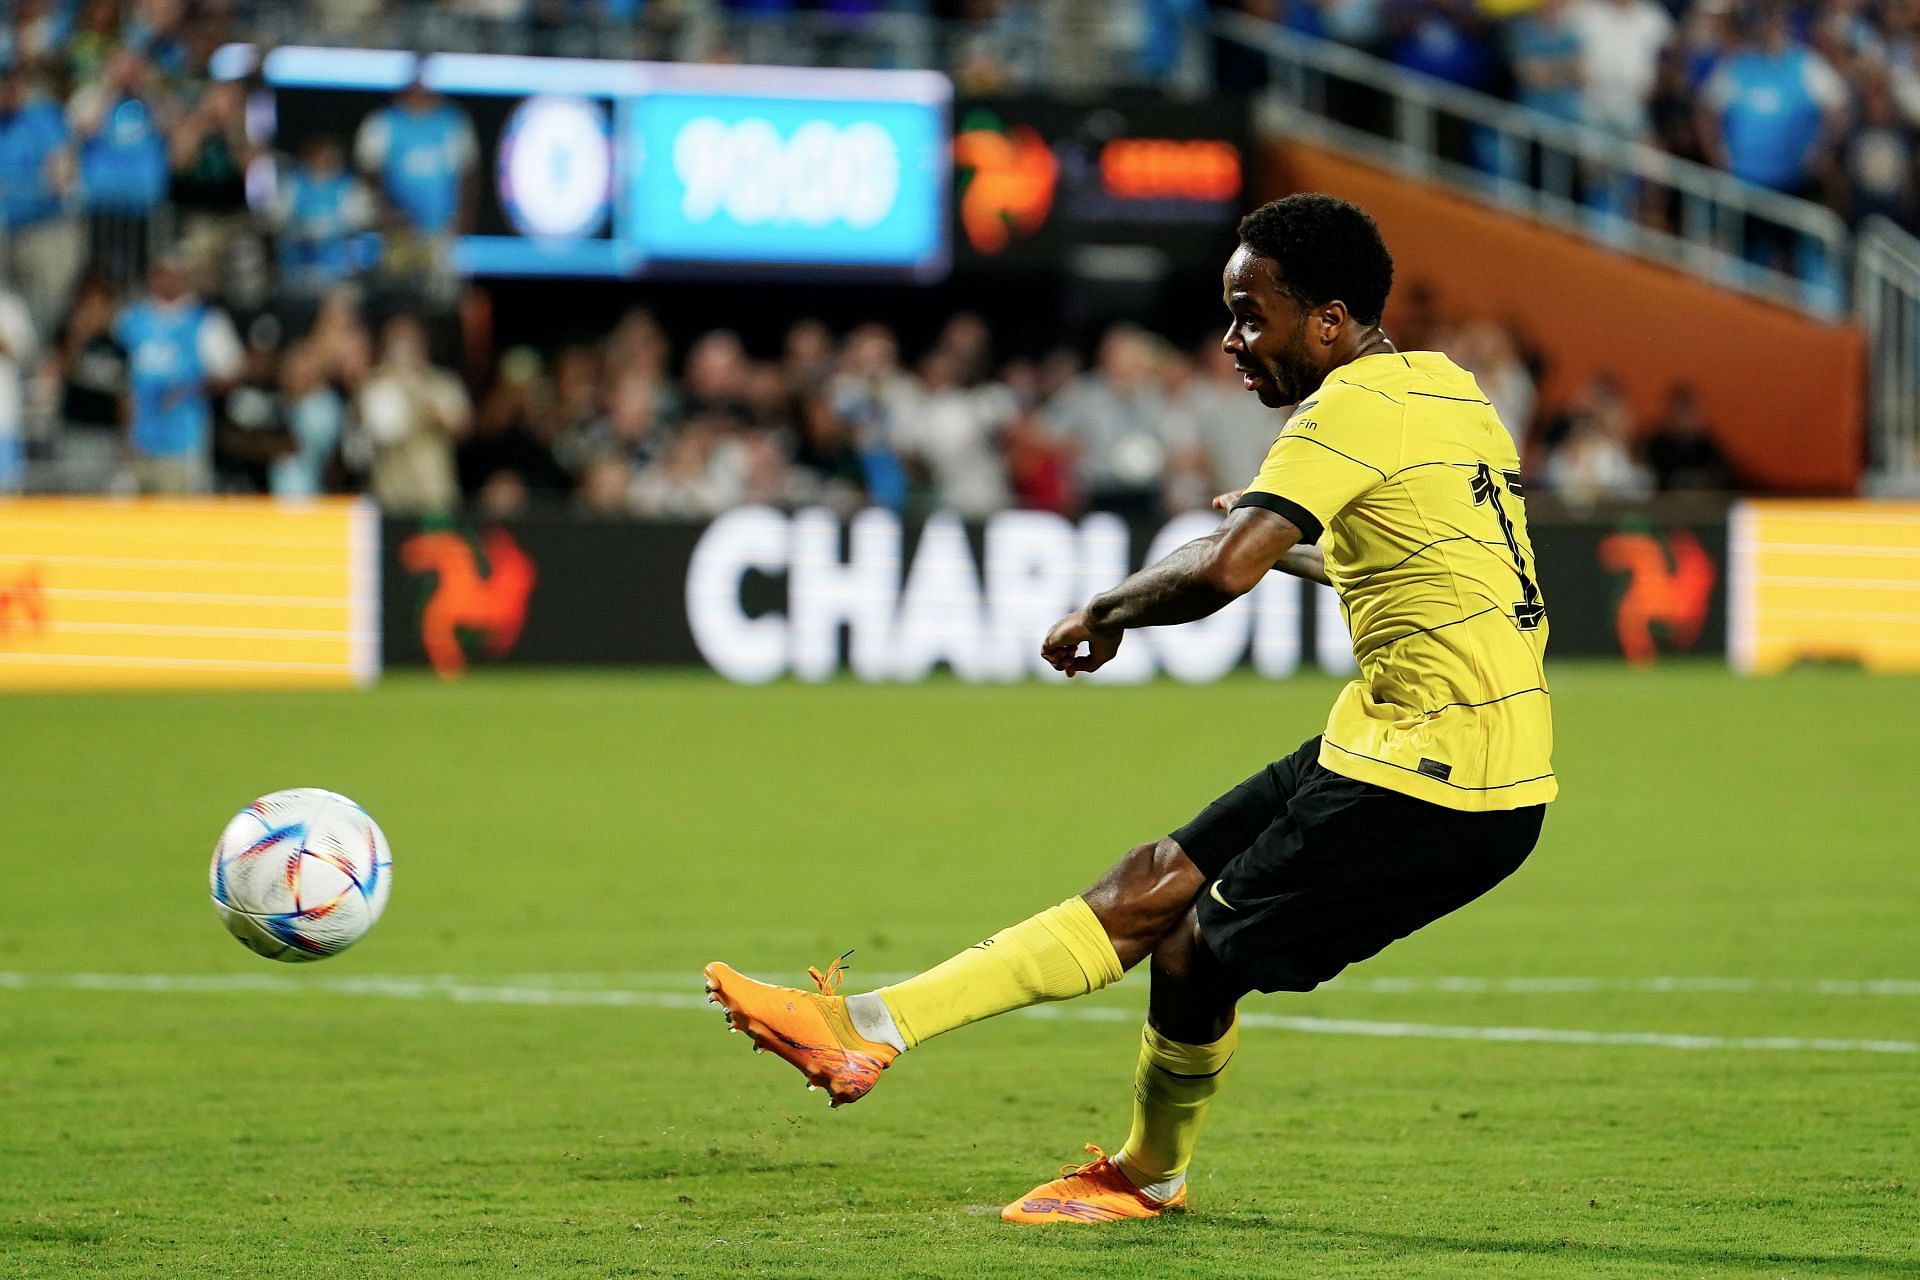 Raheem Sterling in action for Chelsea against Charlotte in a pre-season friendly.